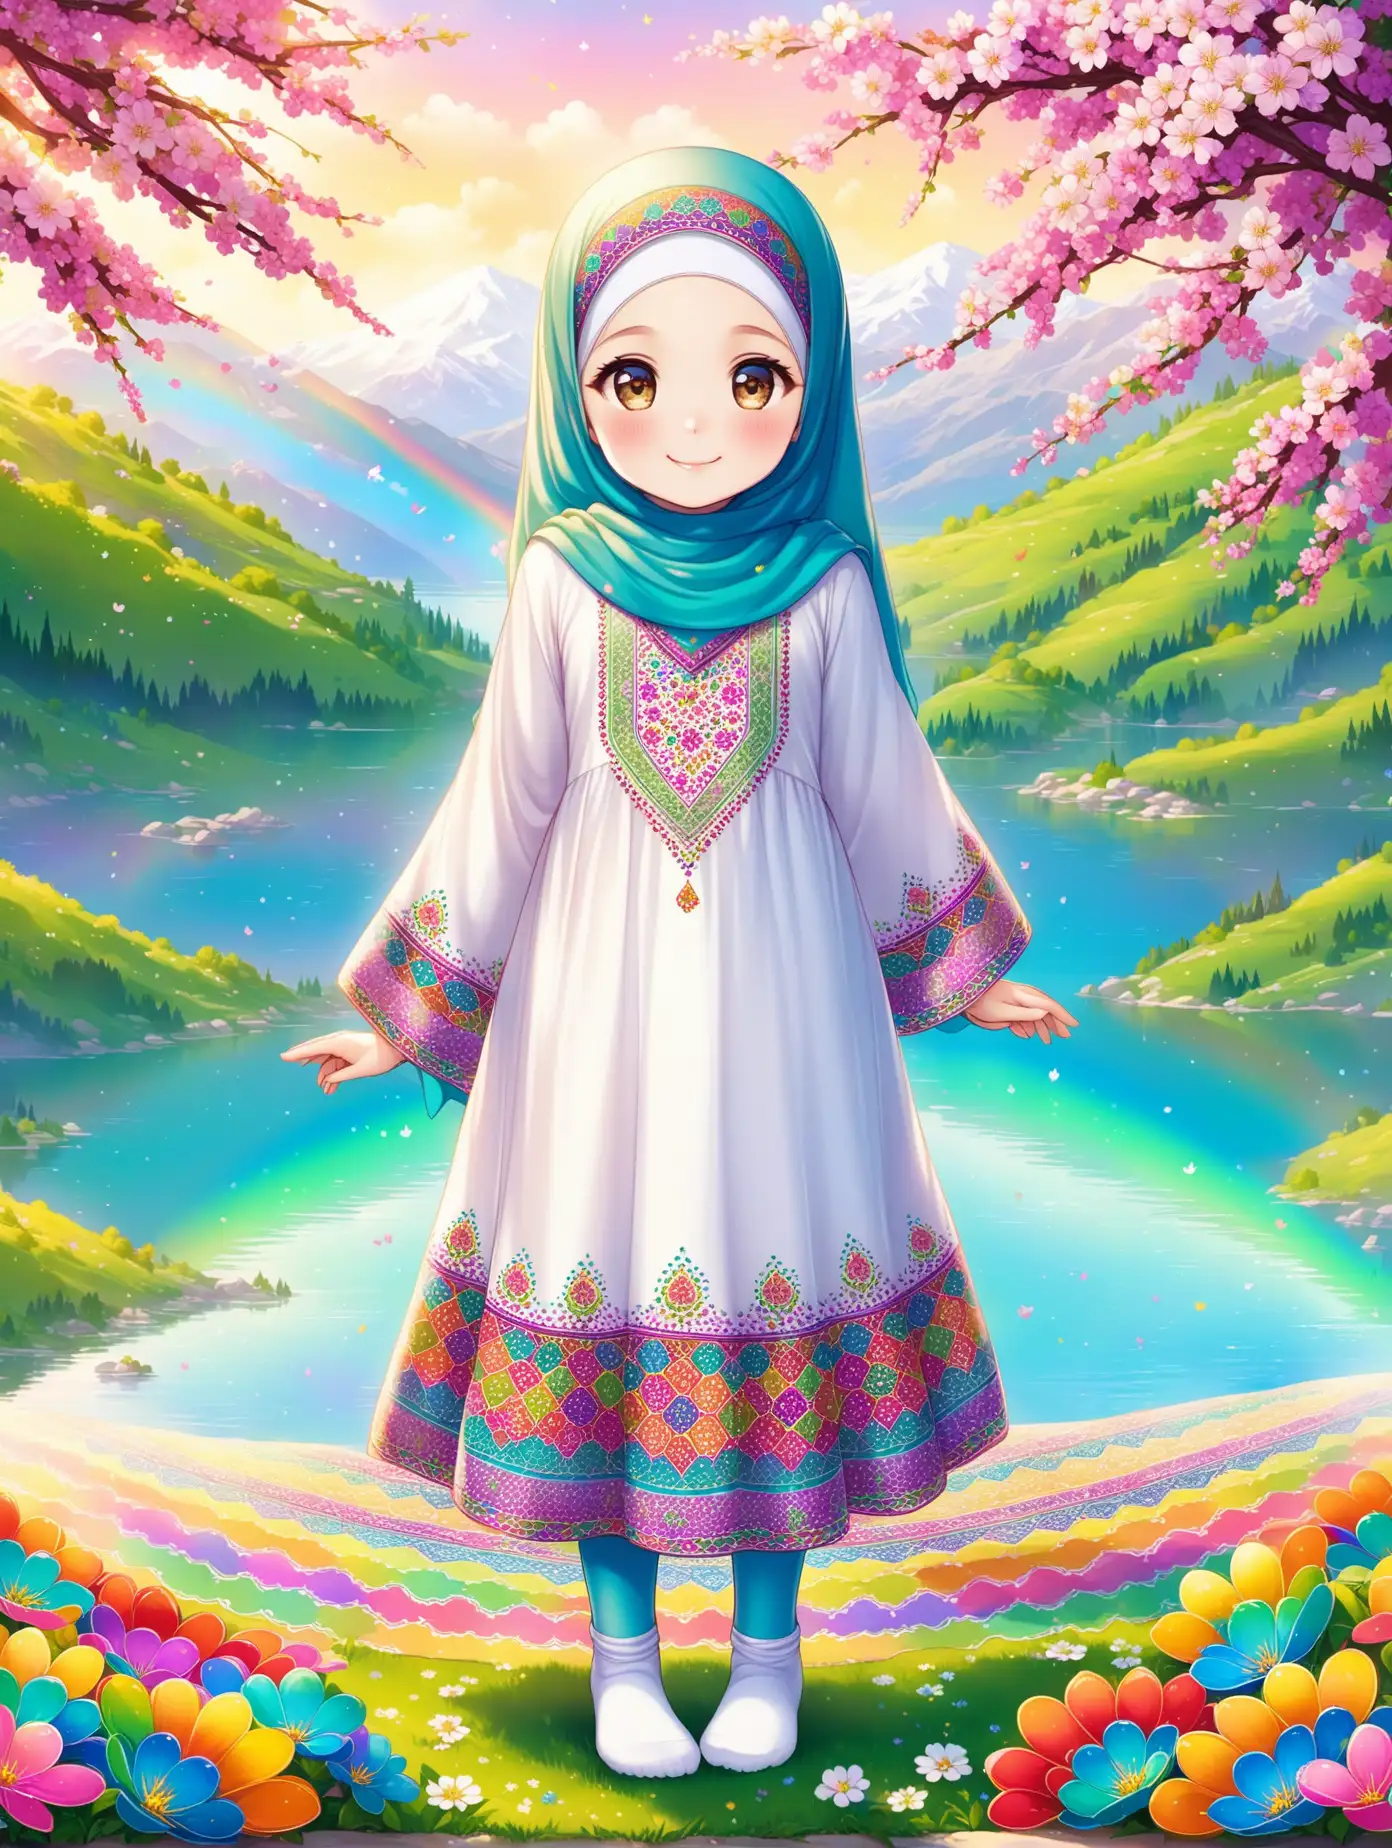 Cute Persian Girl in Hijab Surrounded by Rainbow Flowers by a Spring Lake